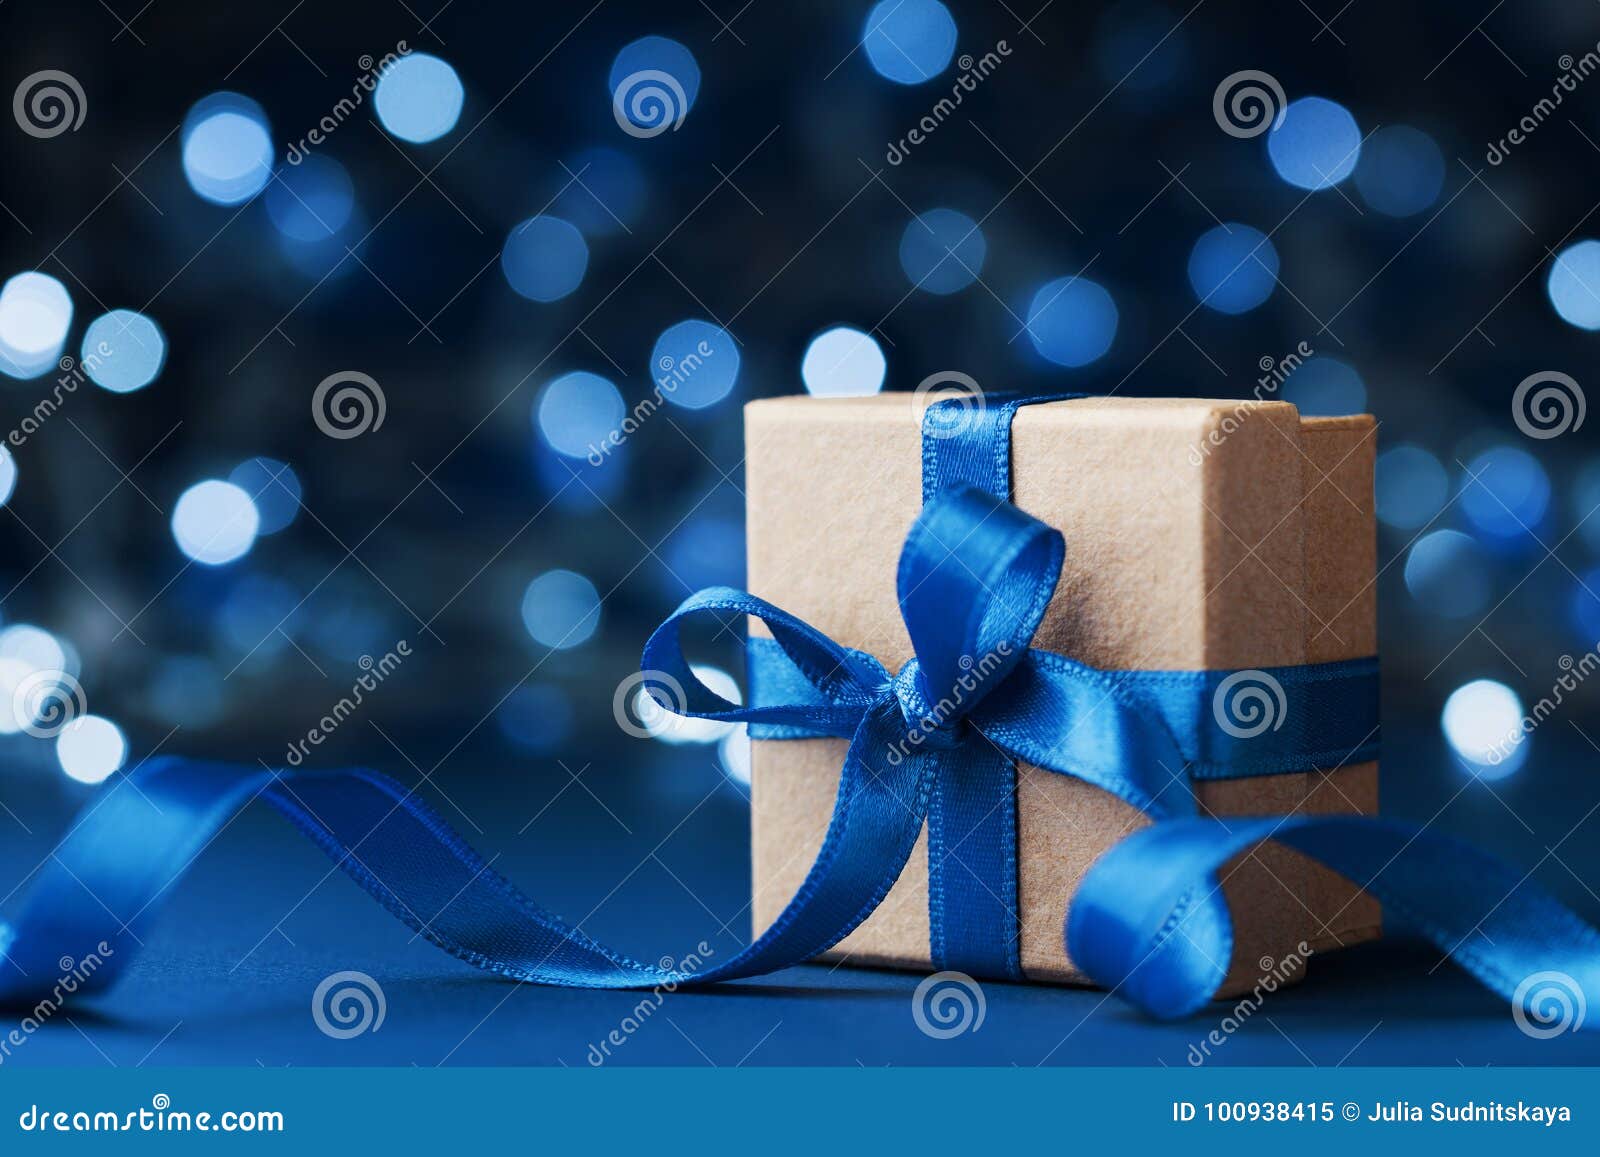 holiday gift box or present with bow ribbon against blue bokeh background. magic christmas greeting card.